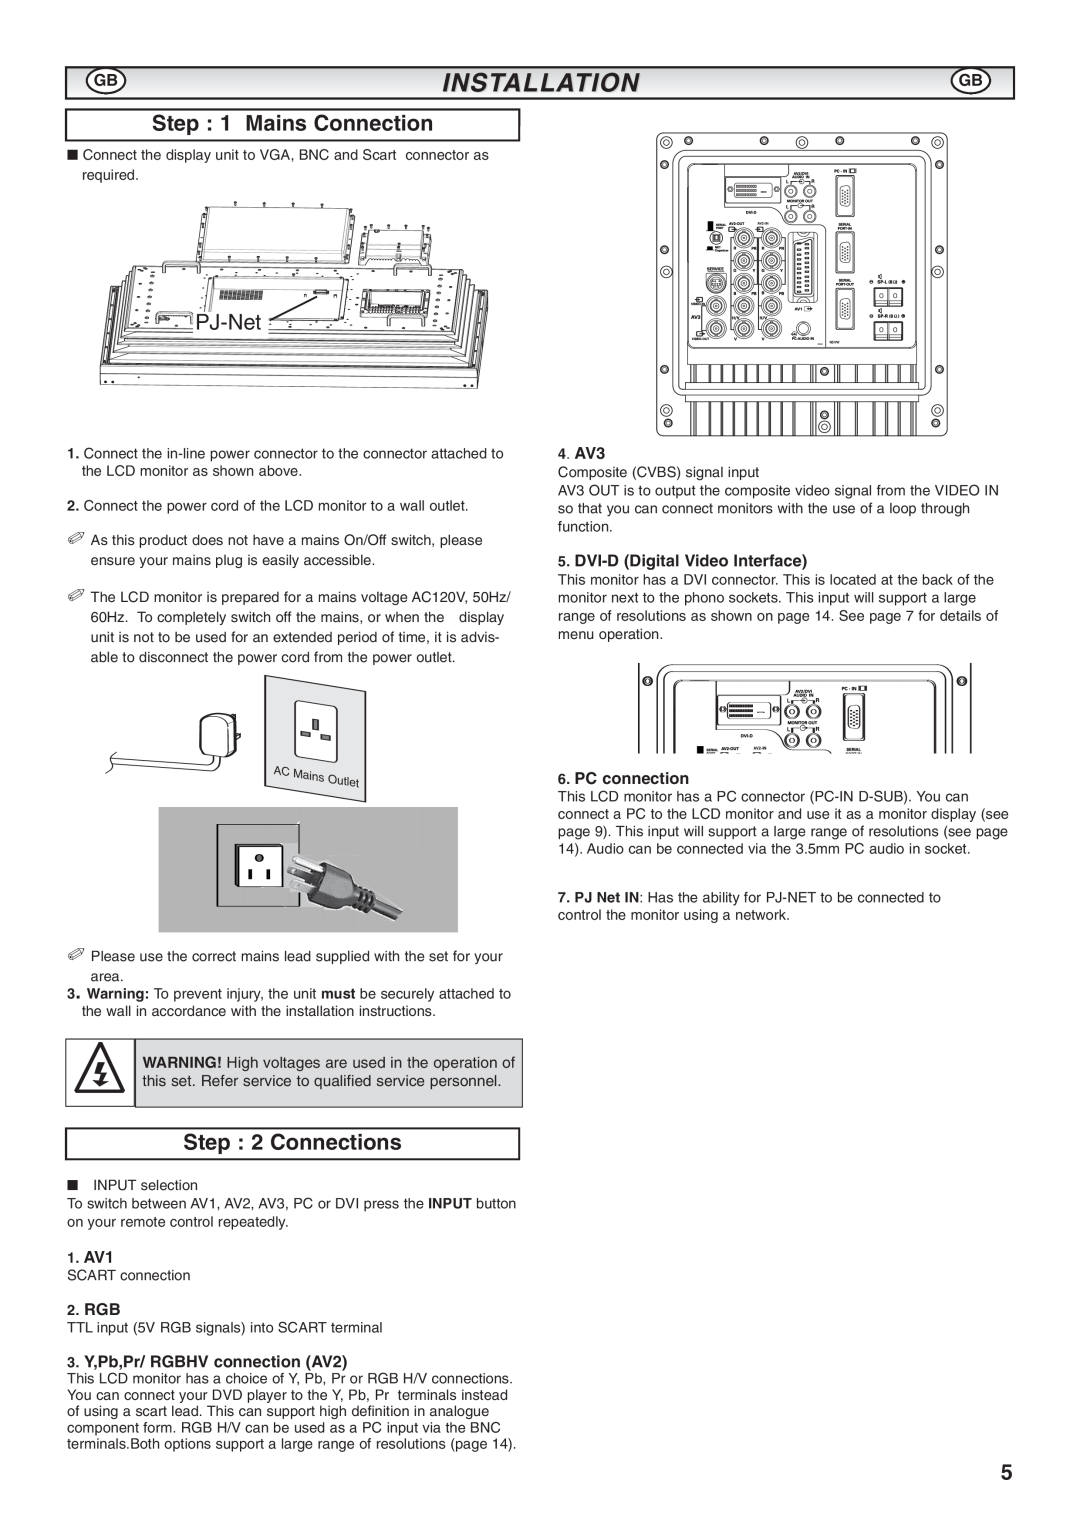 Sanyo CE52LH1R instruction manual Gbinstallation, Mains Connection, Connections, PJ-Net 